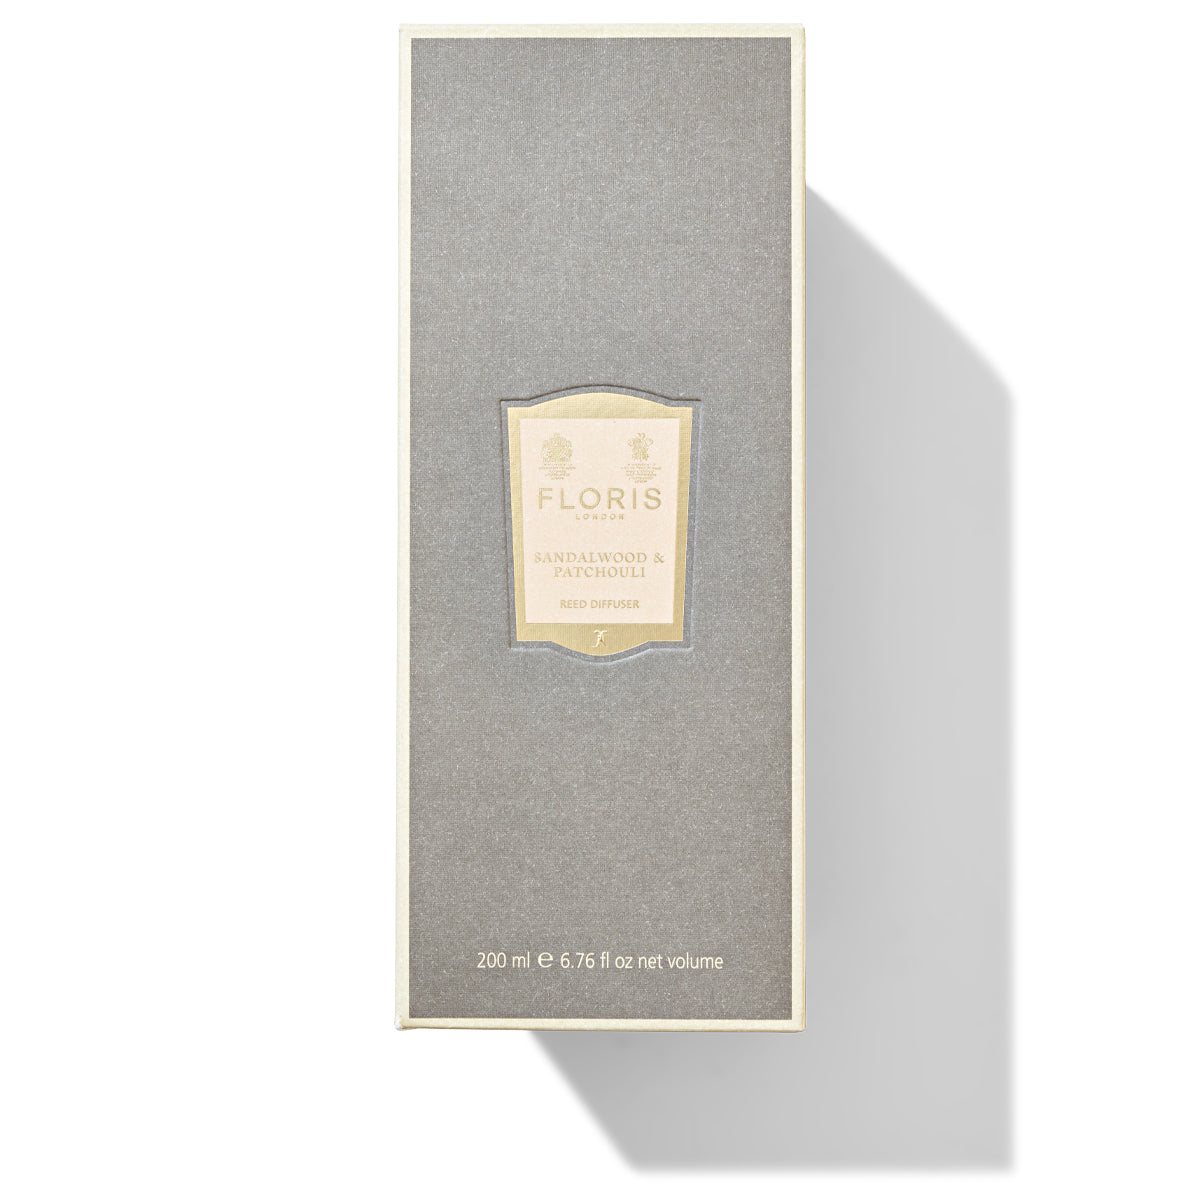 A Floris London Sandalwood & Patchouli Reed Diffuser box featuring a gray and beige design contains 200ml of product enriched with the soothing notes of woody amber.